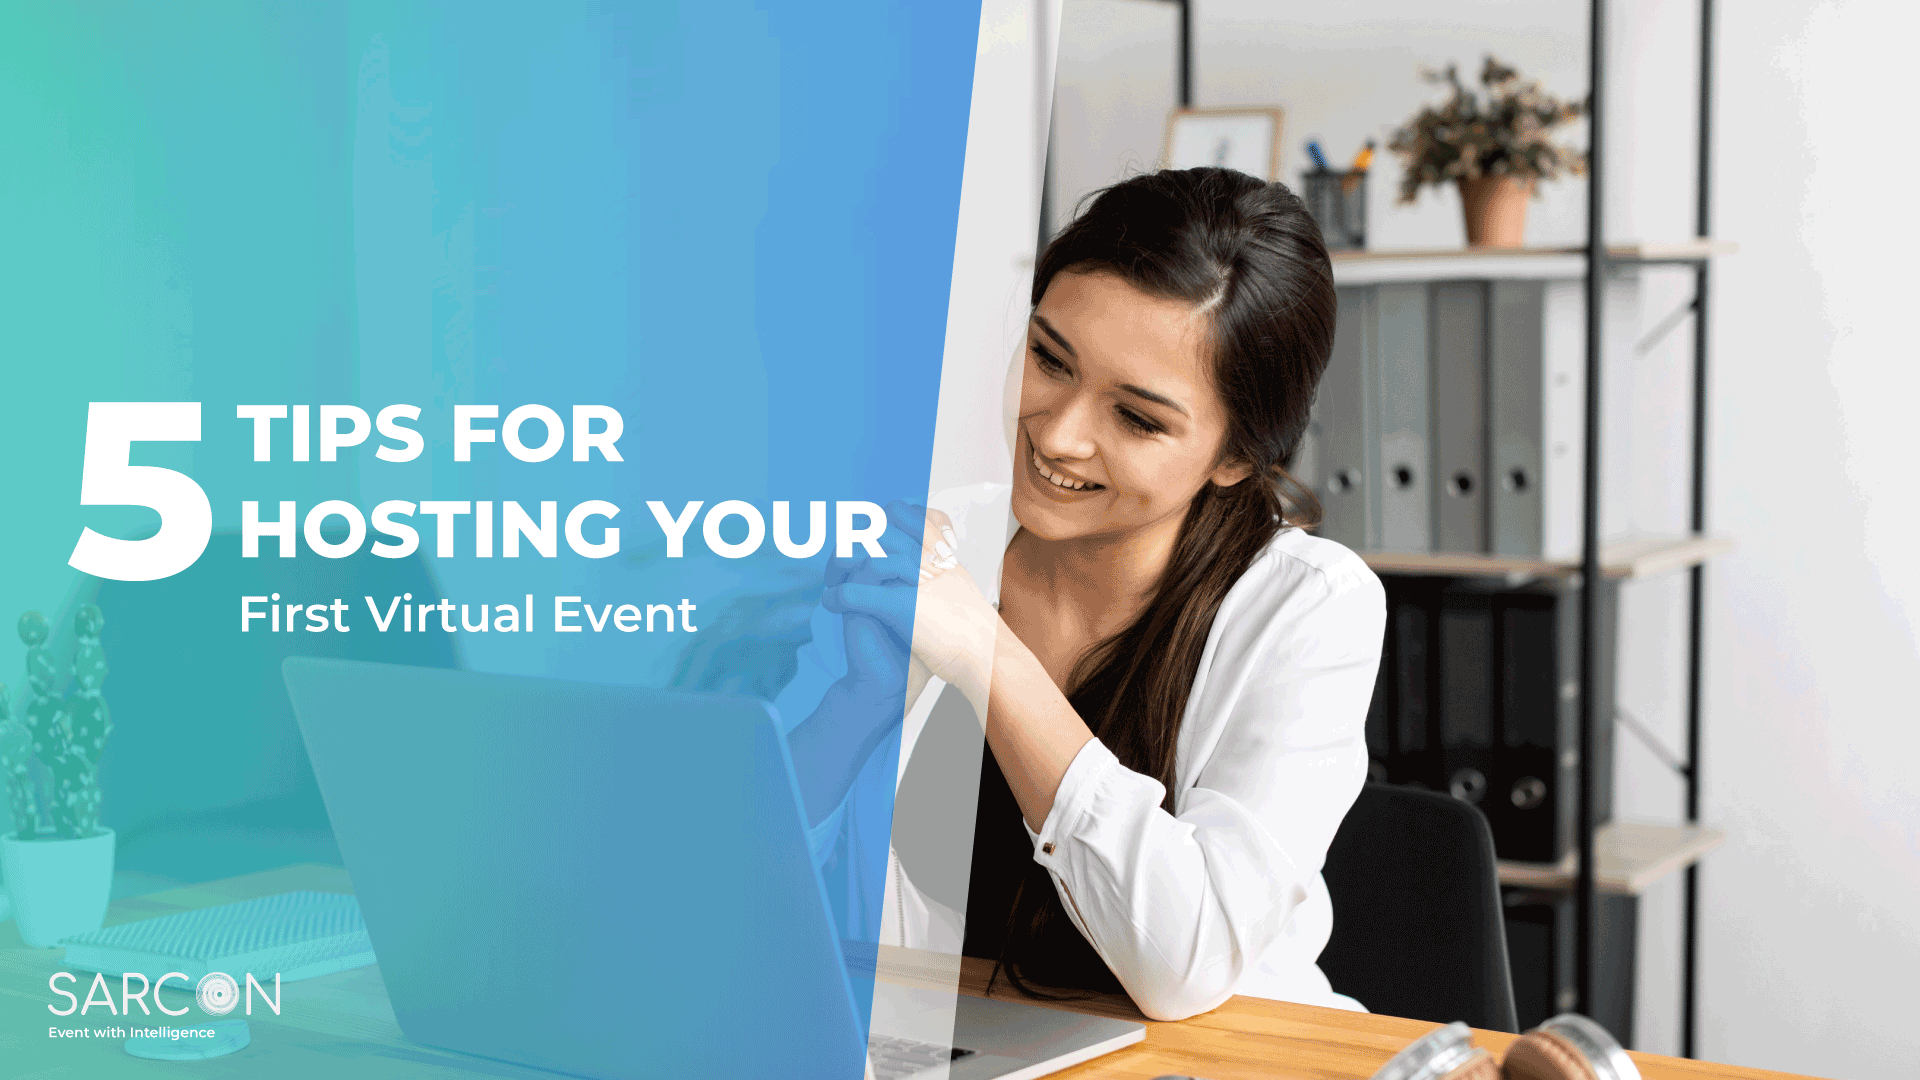 5 tips for first virtual event